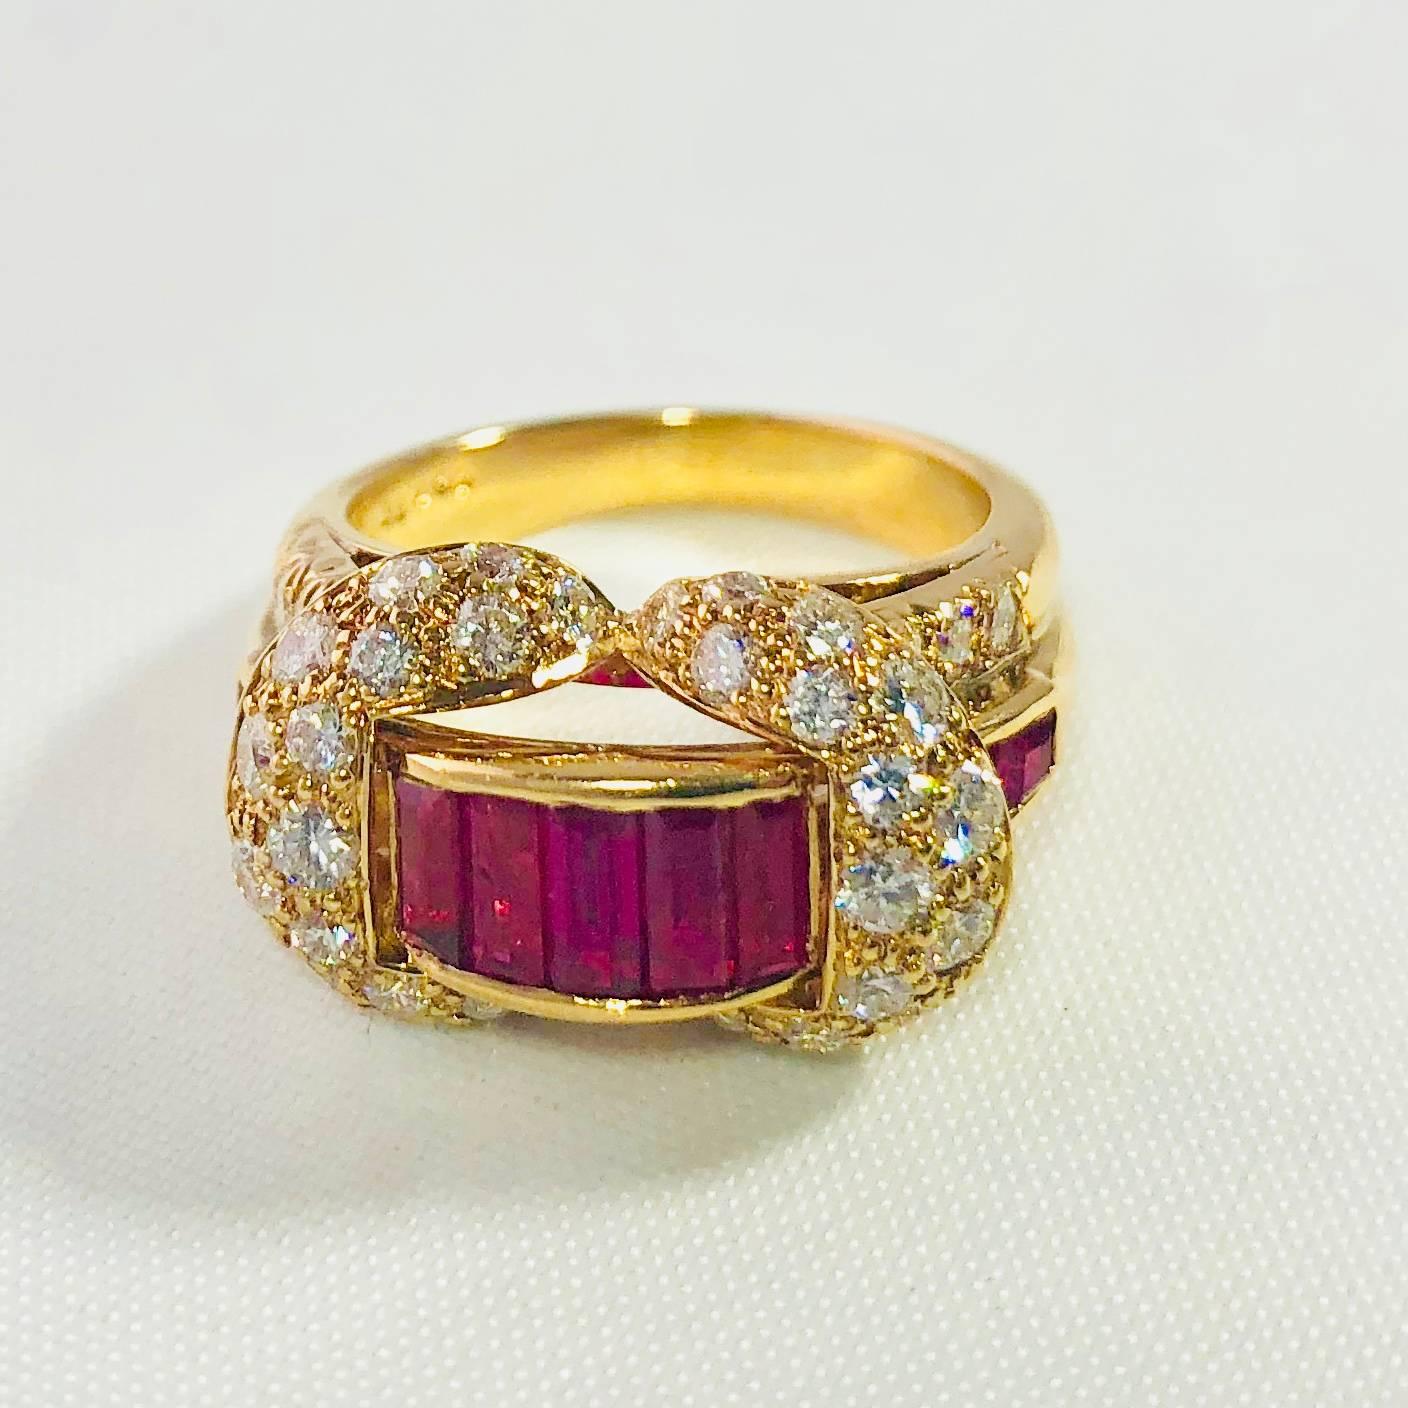 Baguette Cut Oscar Heyman and Brothers 18 Karat Gold, Ruby and Diamond Cocktail Ring For Sale